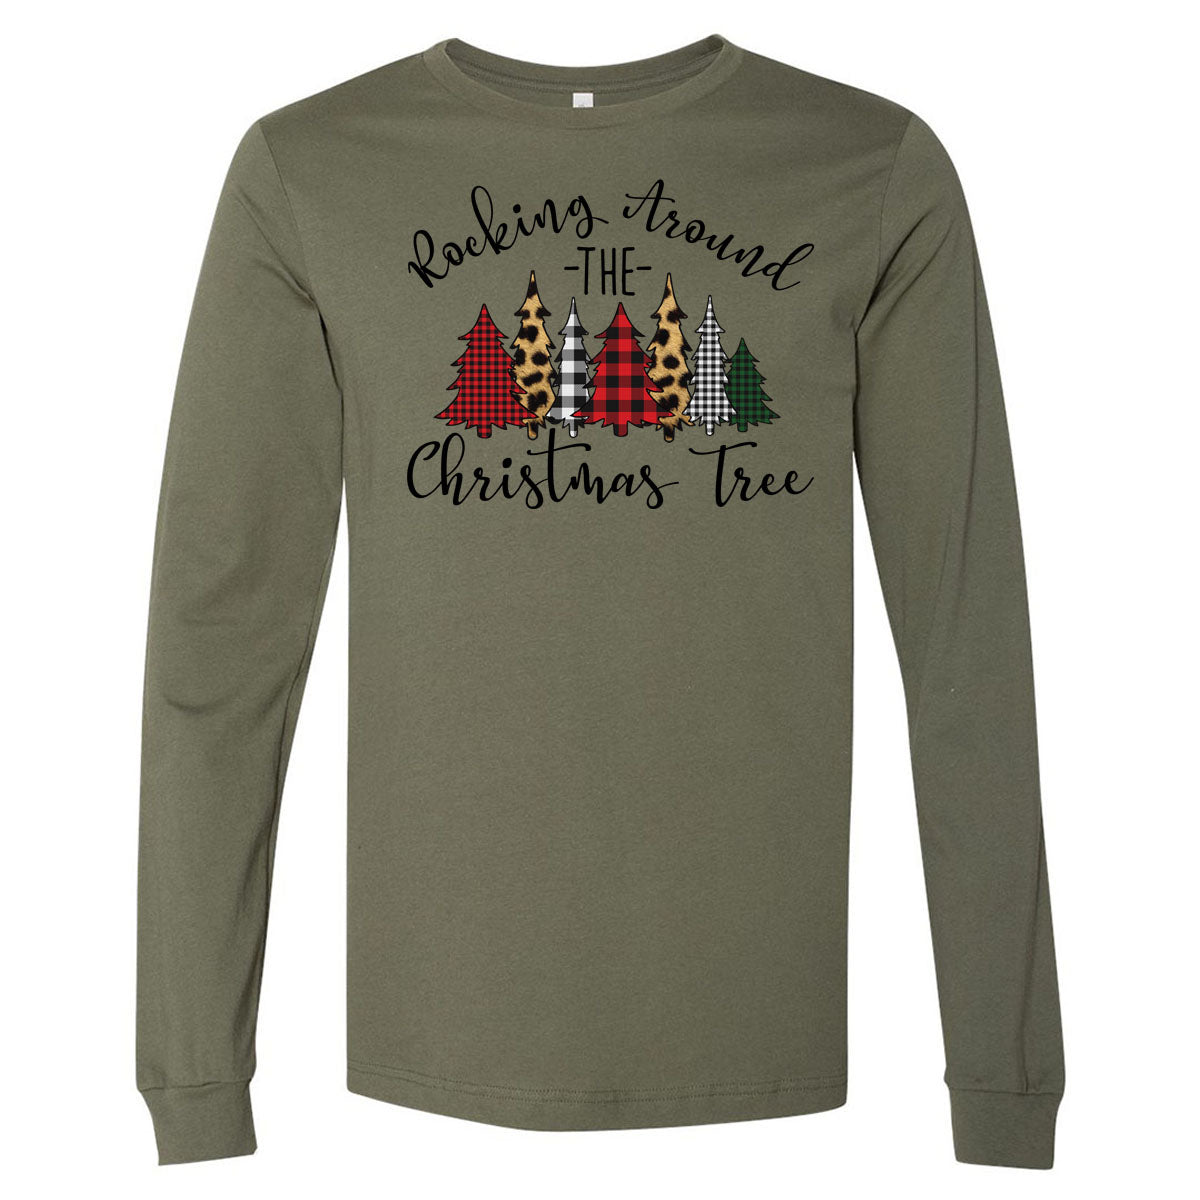 Rocking Around the Christmas Tree - Military Green Longsleeve Tee - Southern Grace Creations